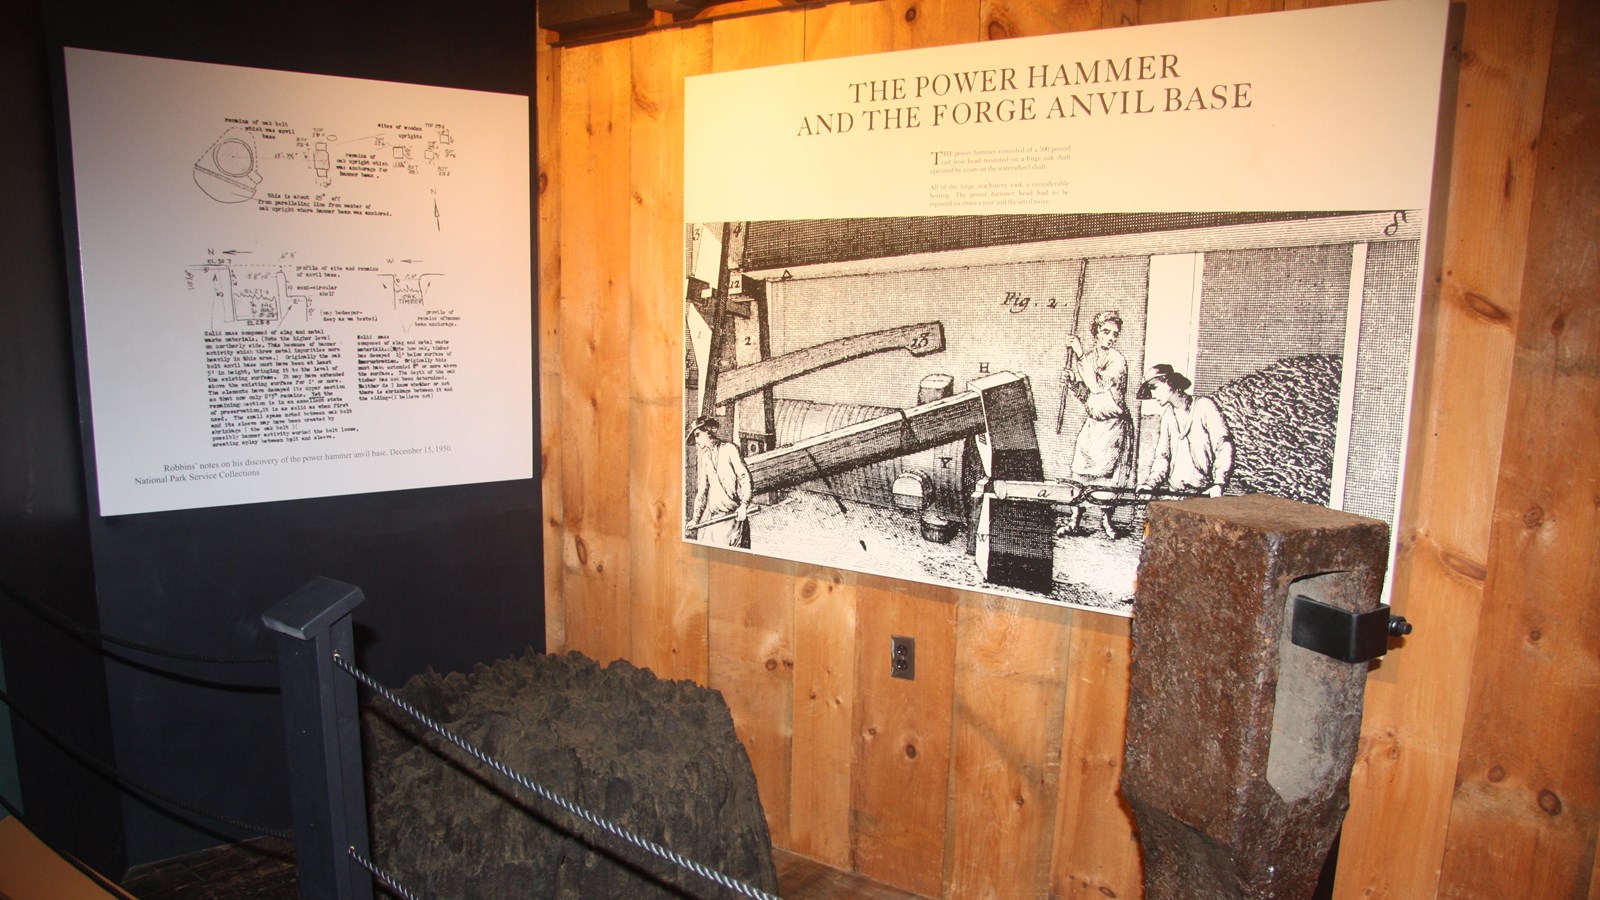 exhibit with images showing how items were used and made as well as original anvil base and hammer